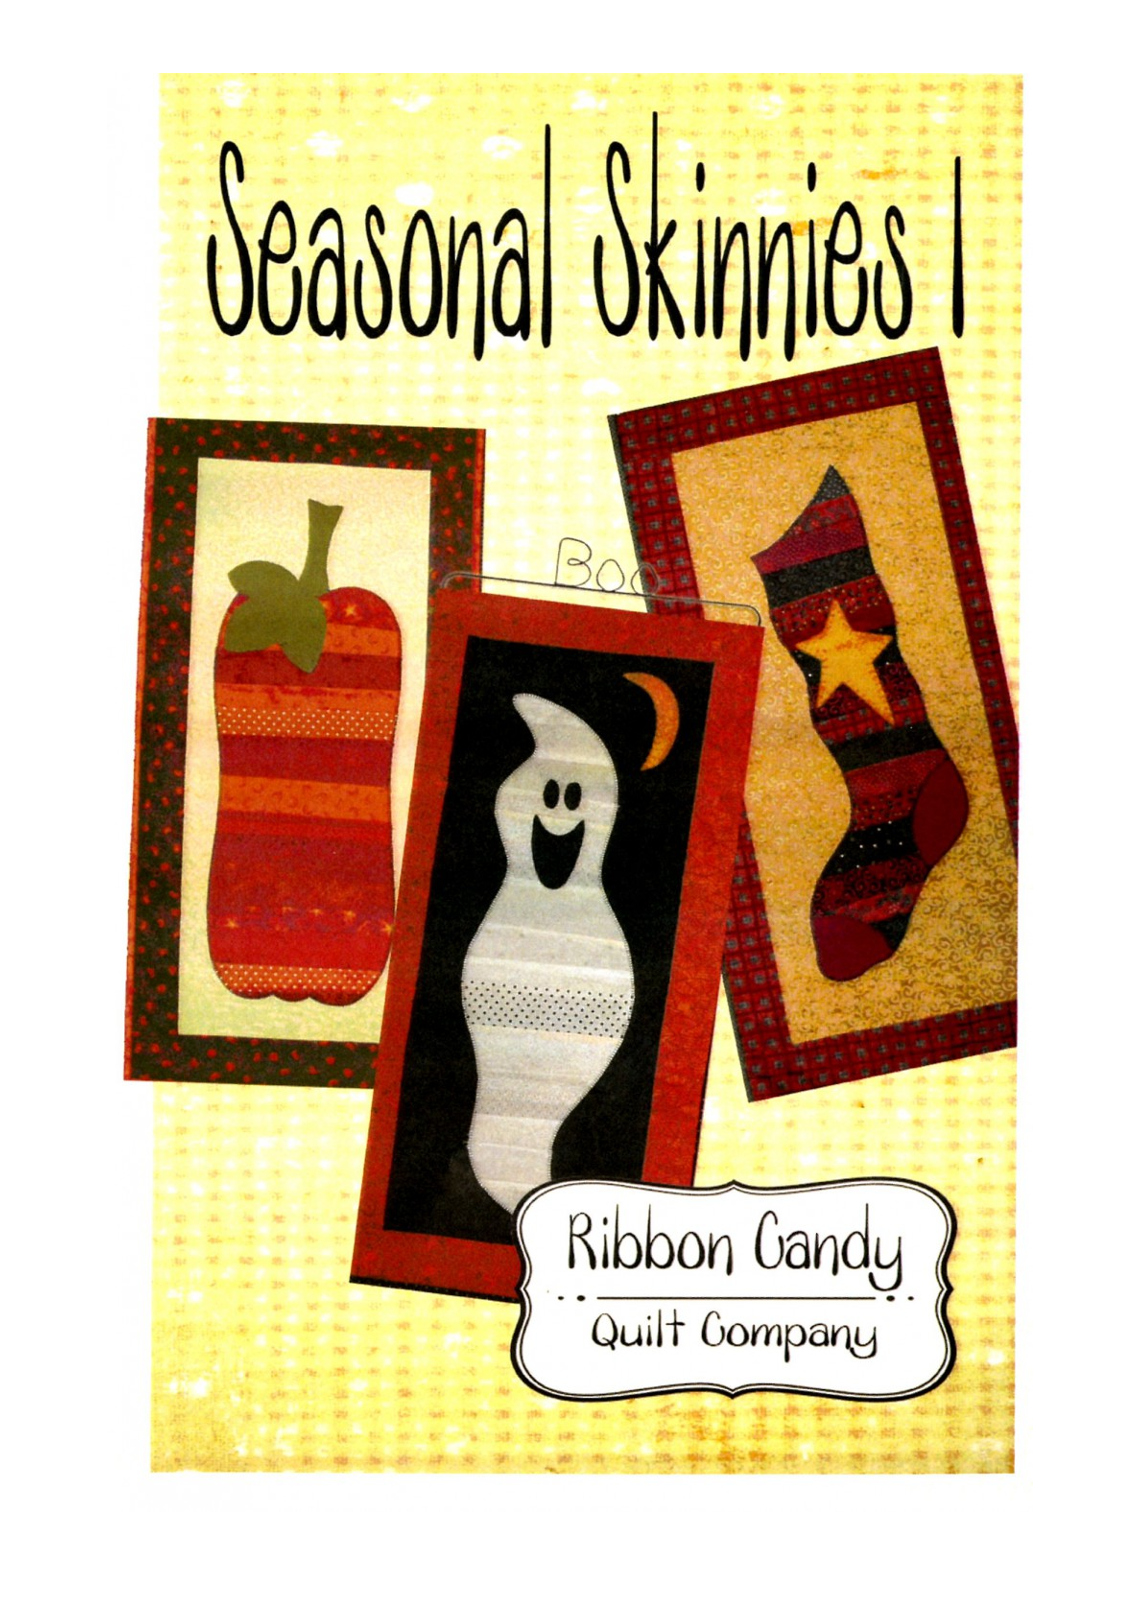 Ribbon Candy Quilt Company Seasonal Skinnies Halloween Themed Fusible Applique Pattern